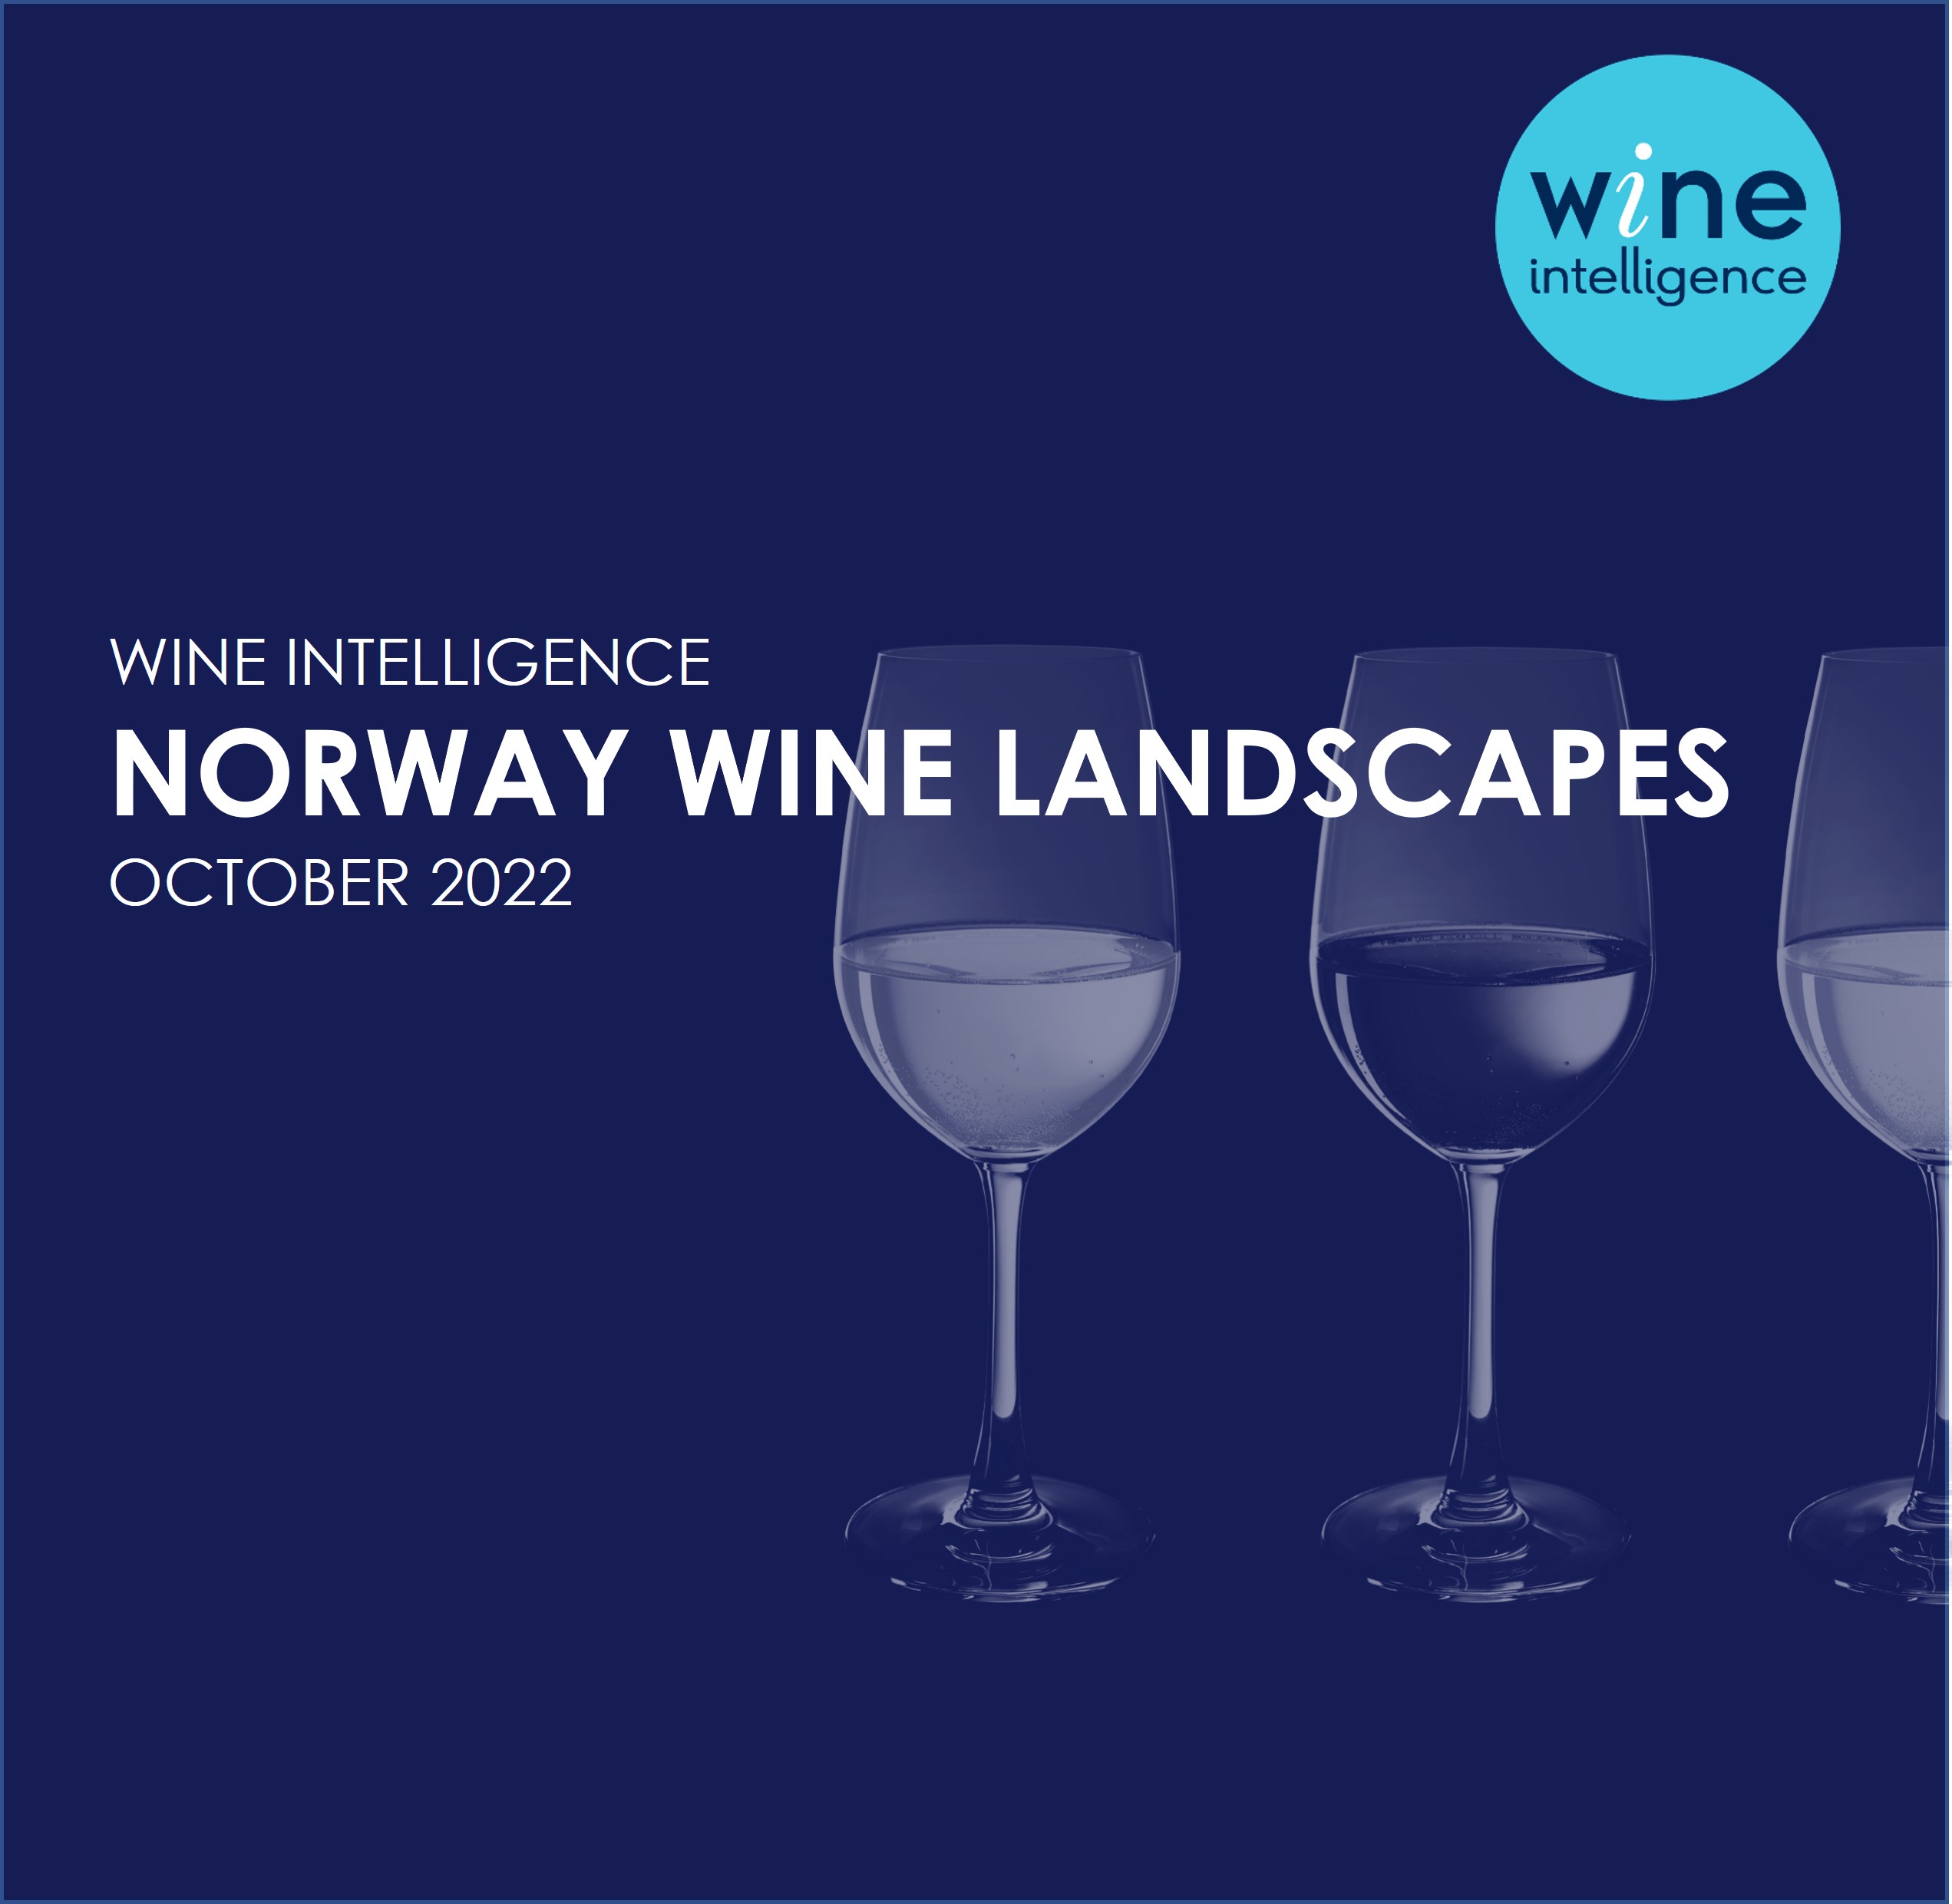 Norway wine landscapes report 2022 - Home